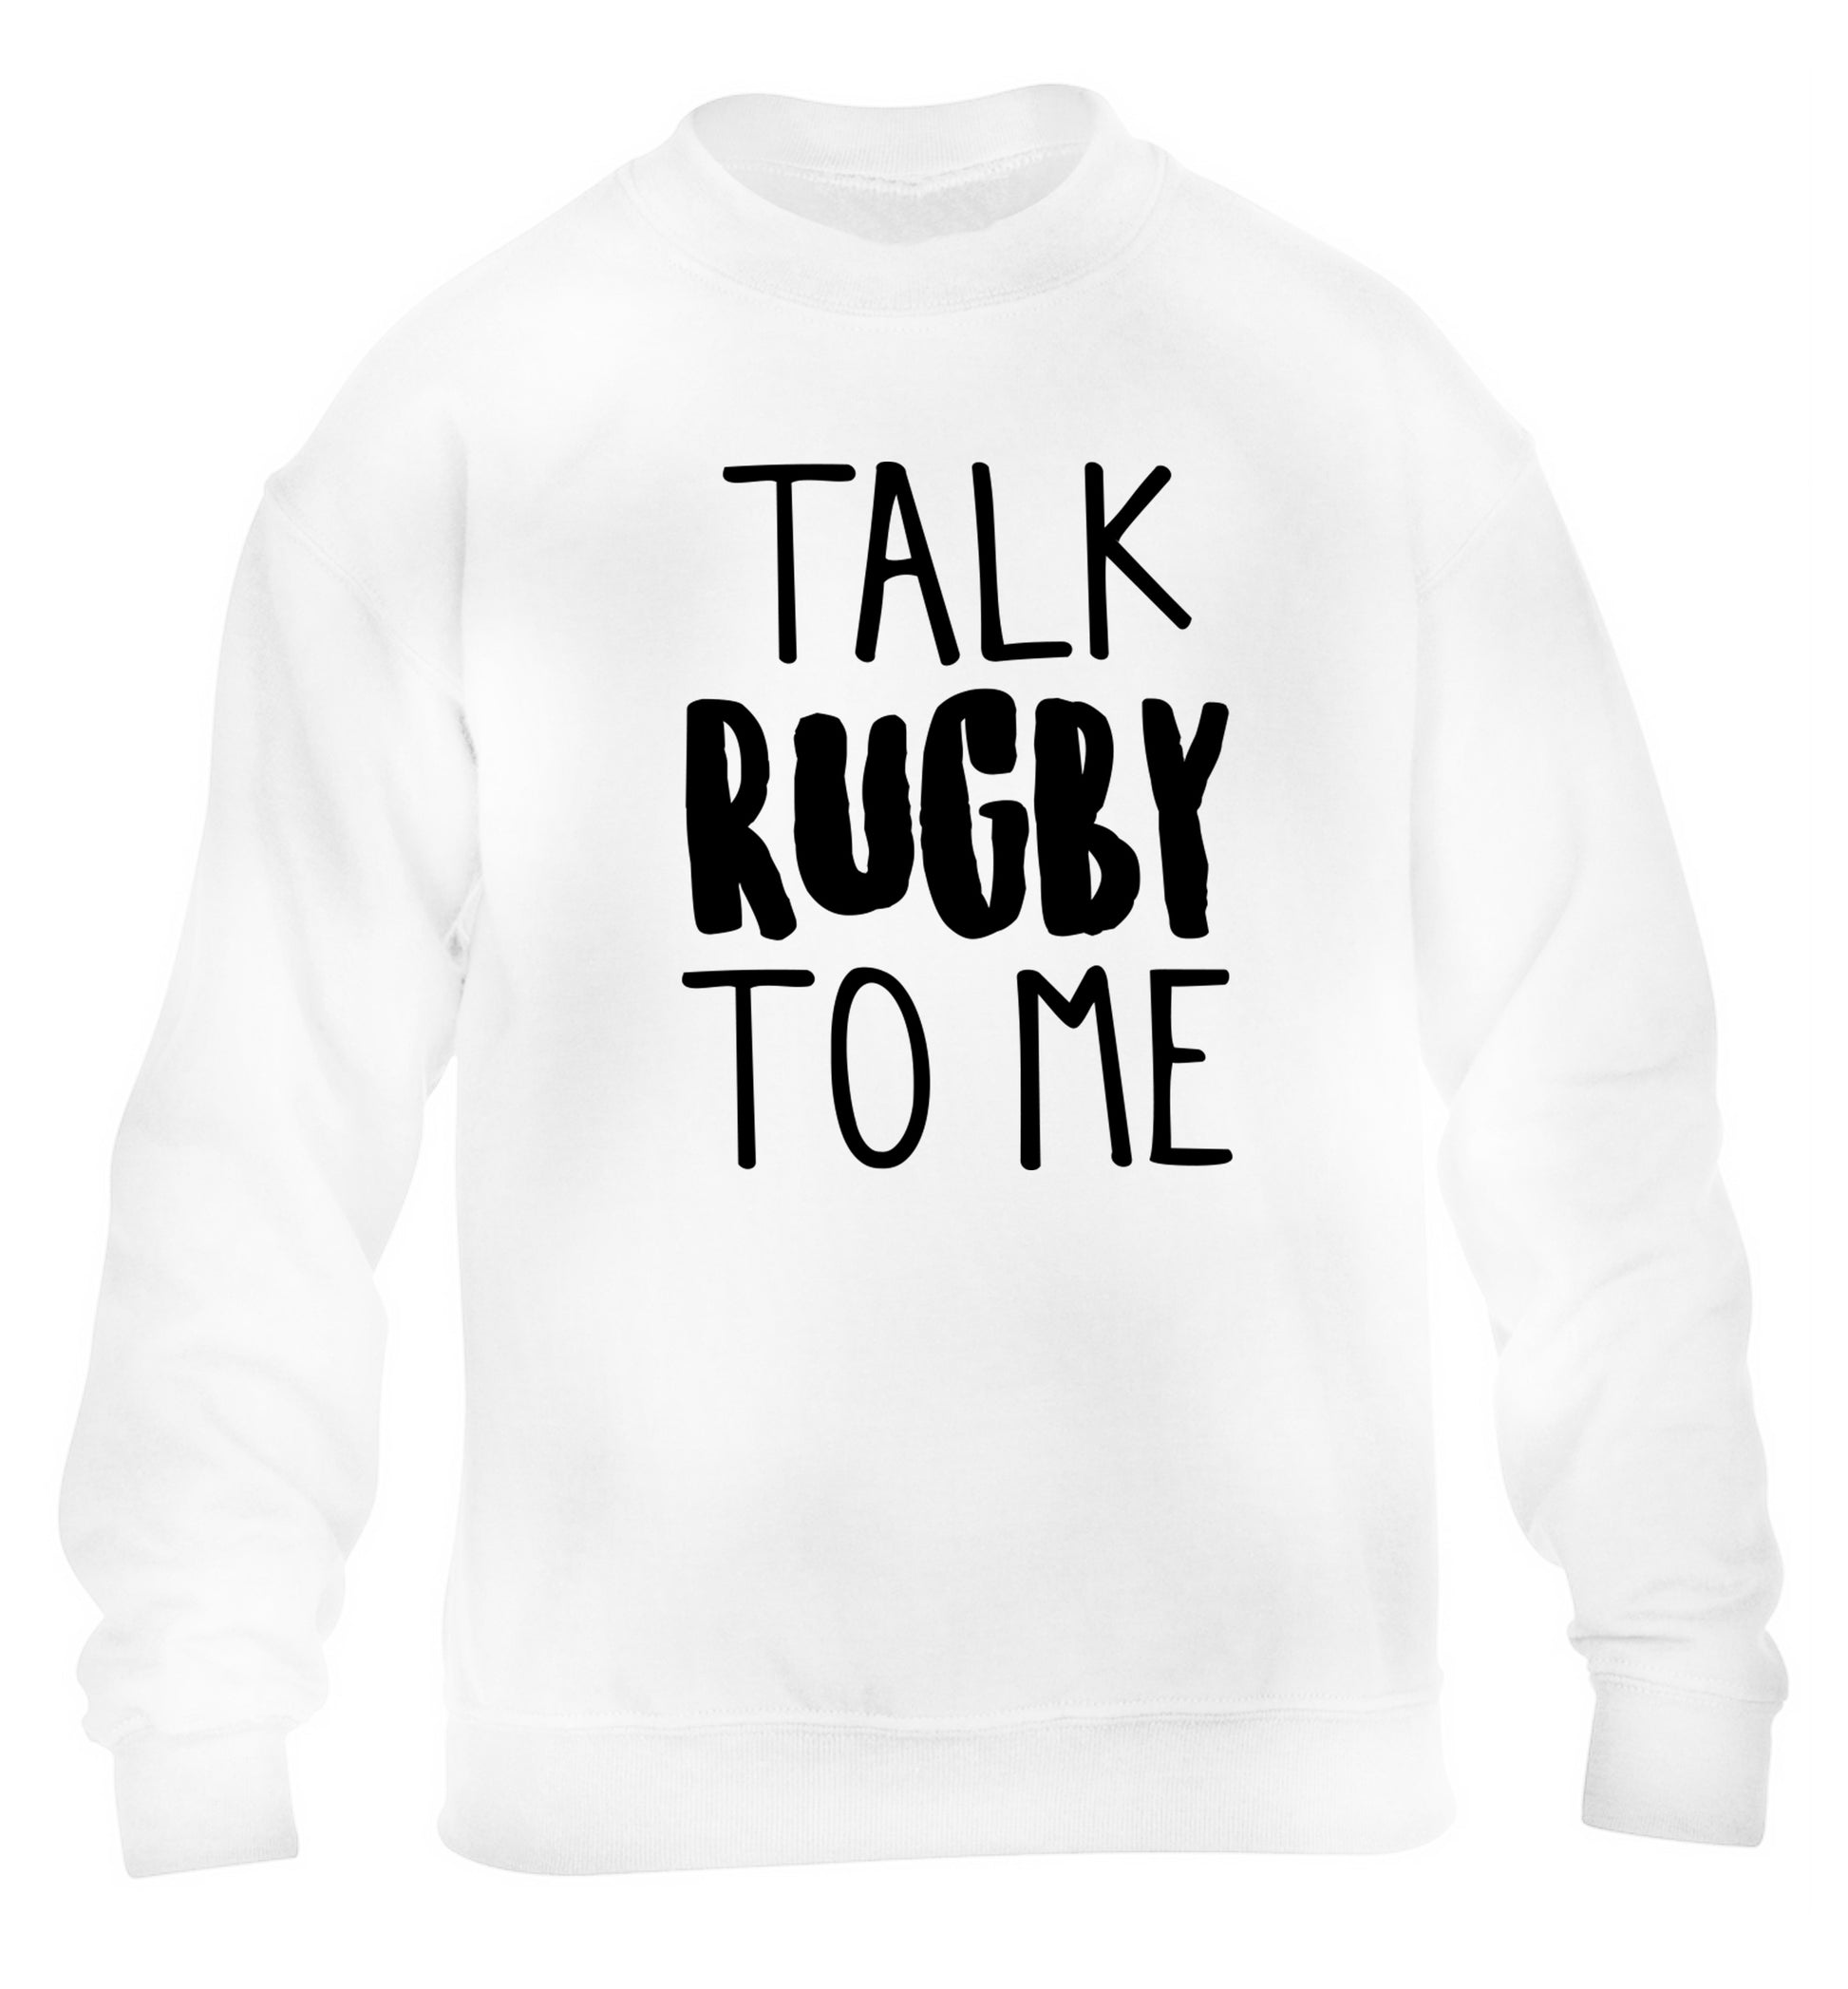 Talk rugby to me children's white sweater 12-13 Years